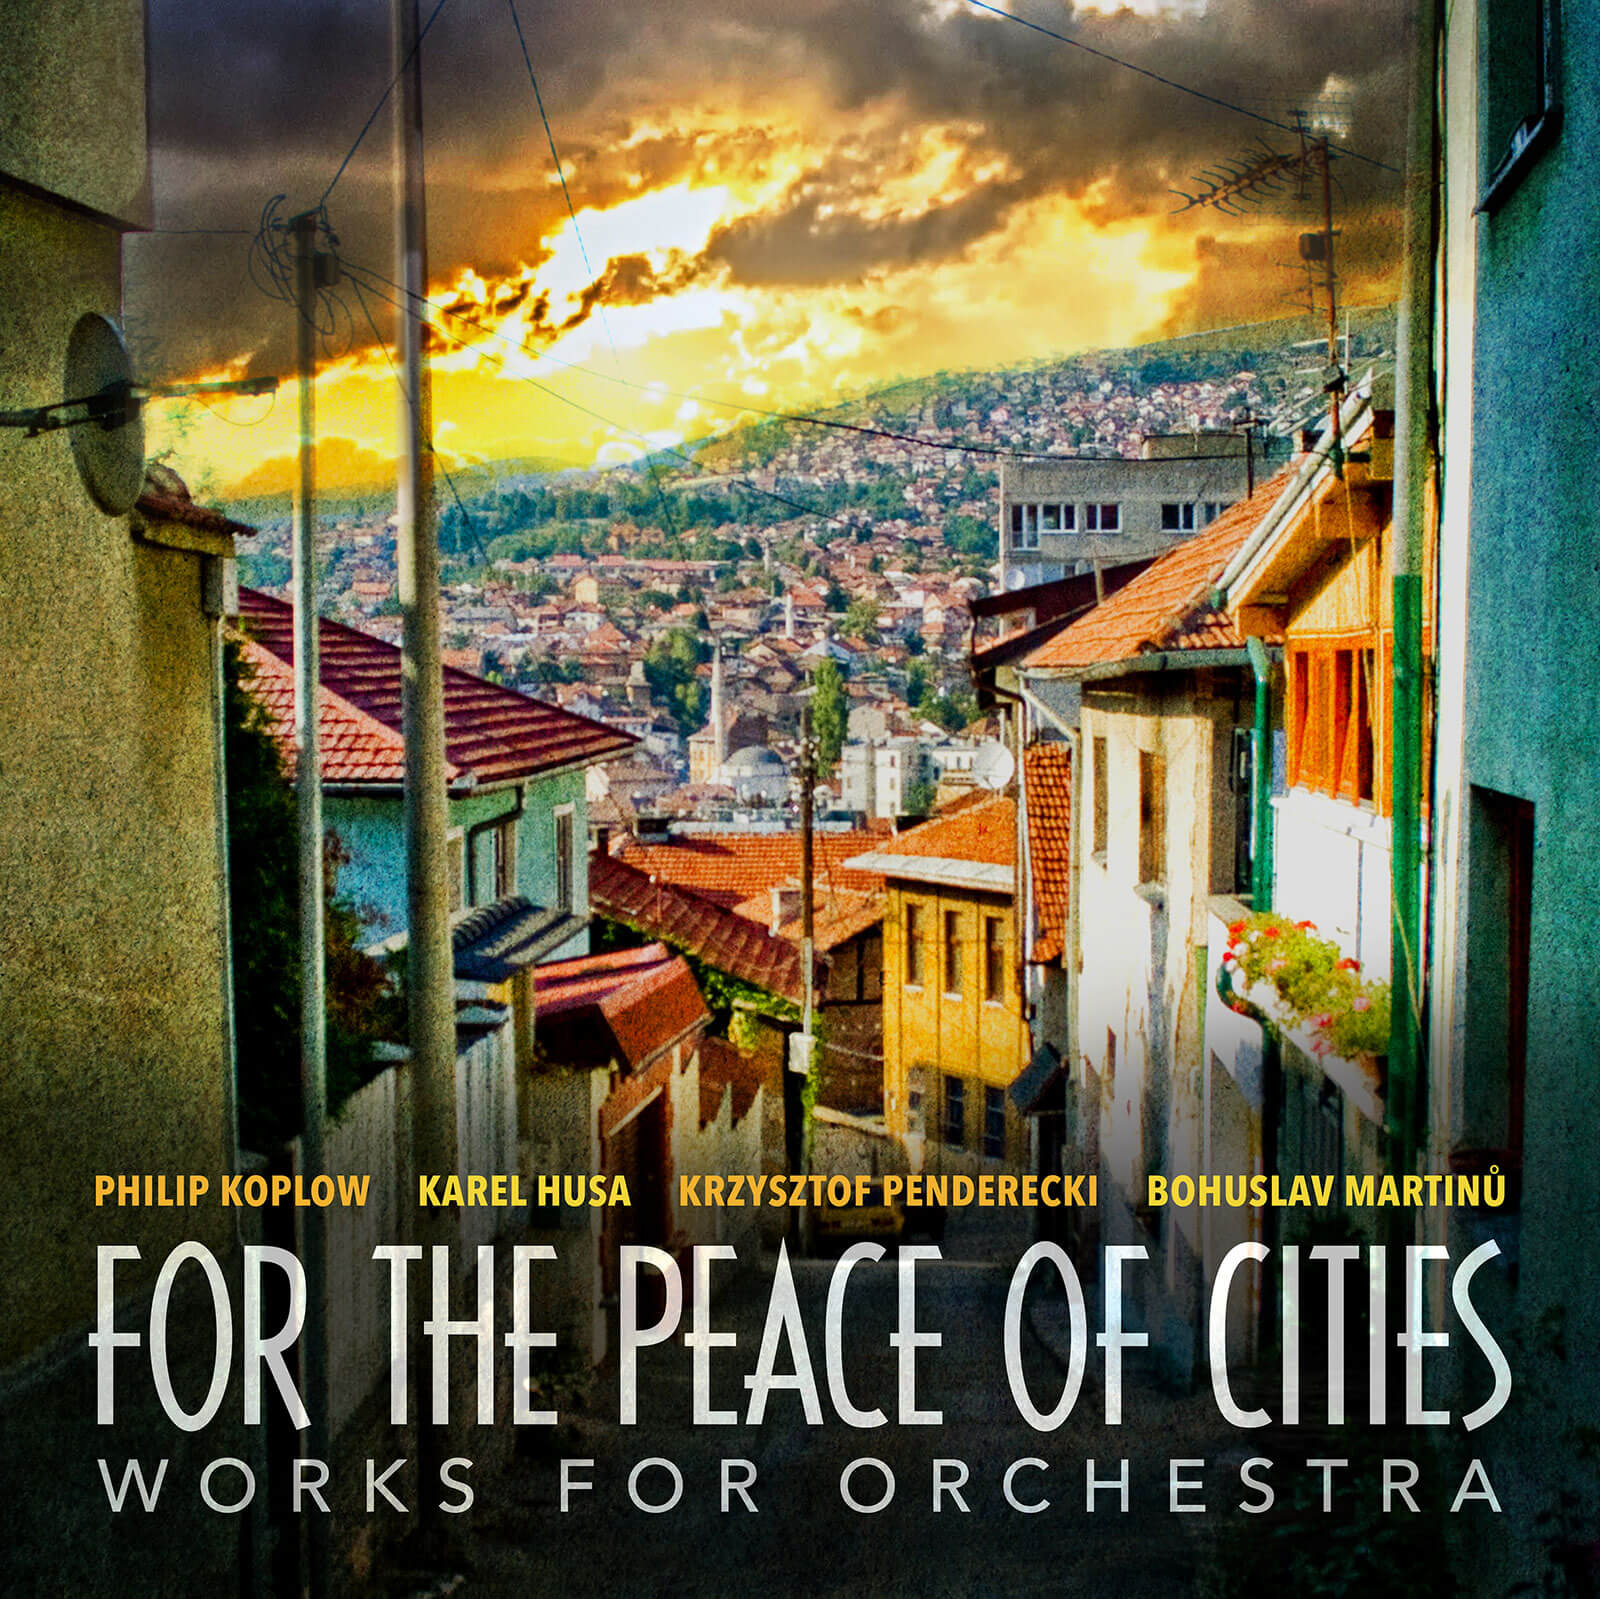 For the Peace of Cities